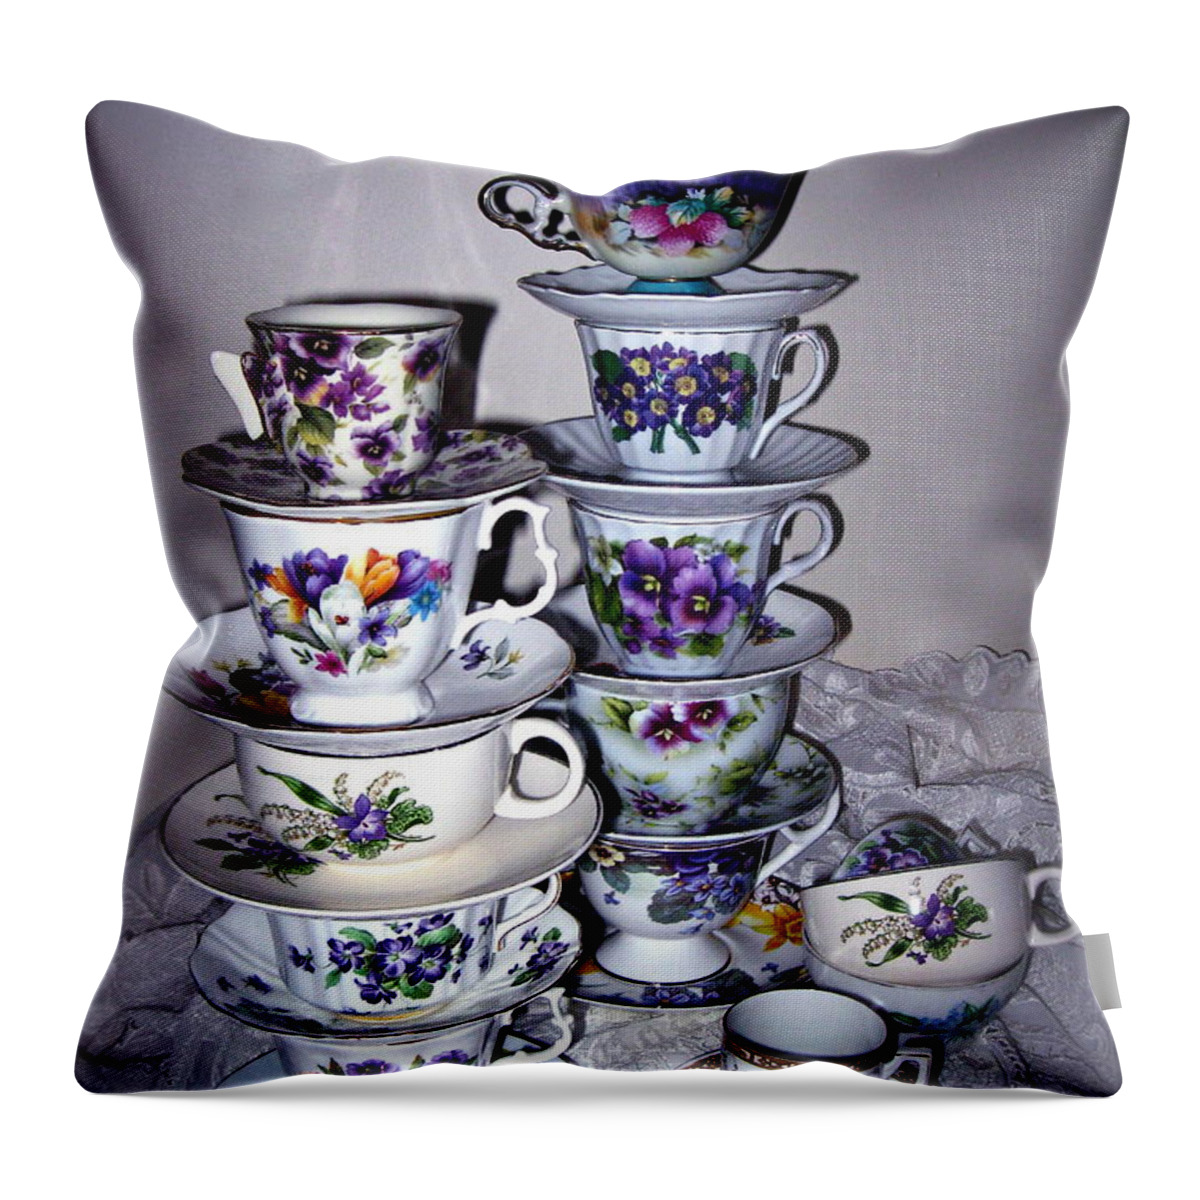 Purple Tea Cups Throw Pillow featuring the photograph Stacks of Purple Teacups by Nancy Patterson